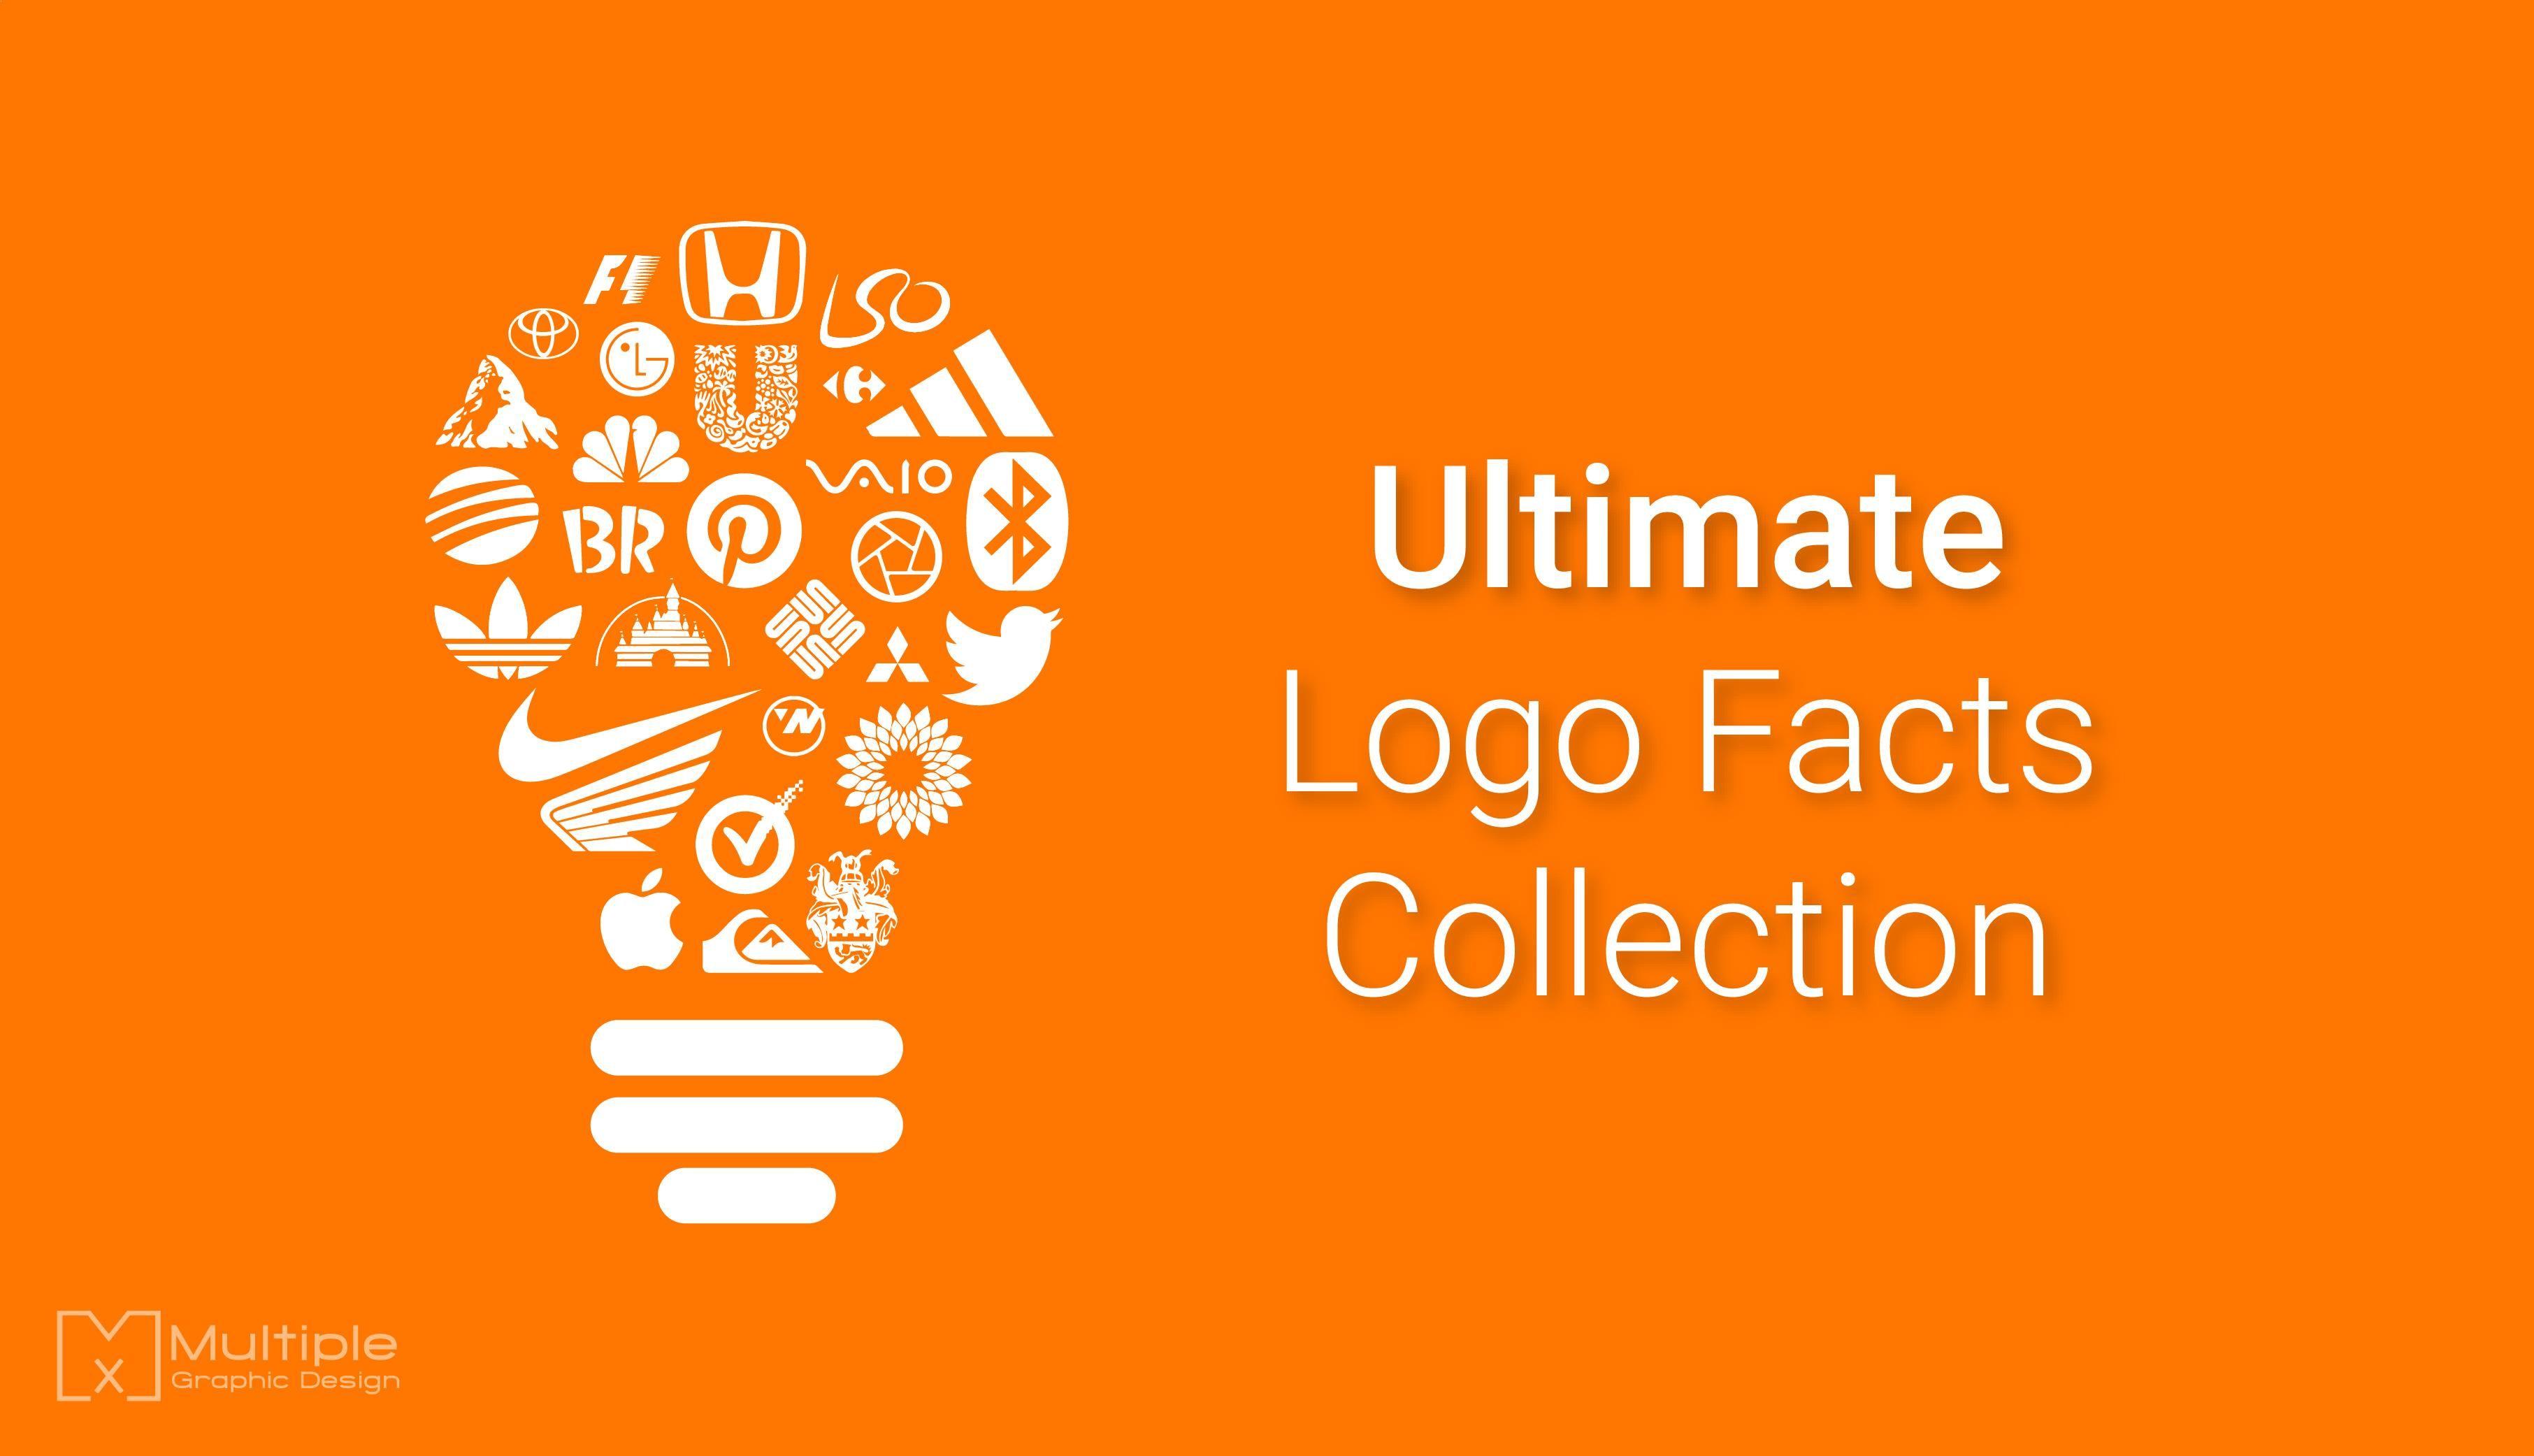 Ultimate Logo - Ultimate Logo Facts Collection | Multiple Graphic Design